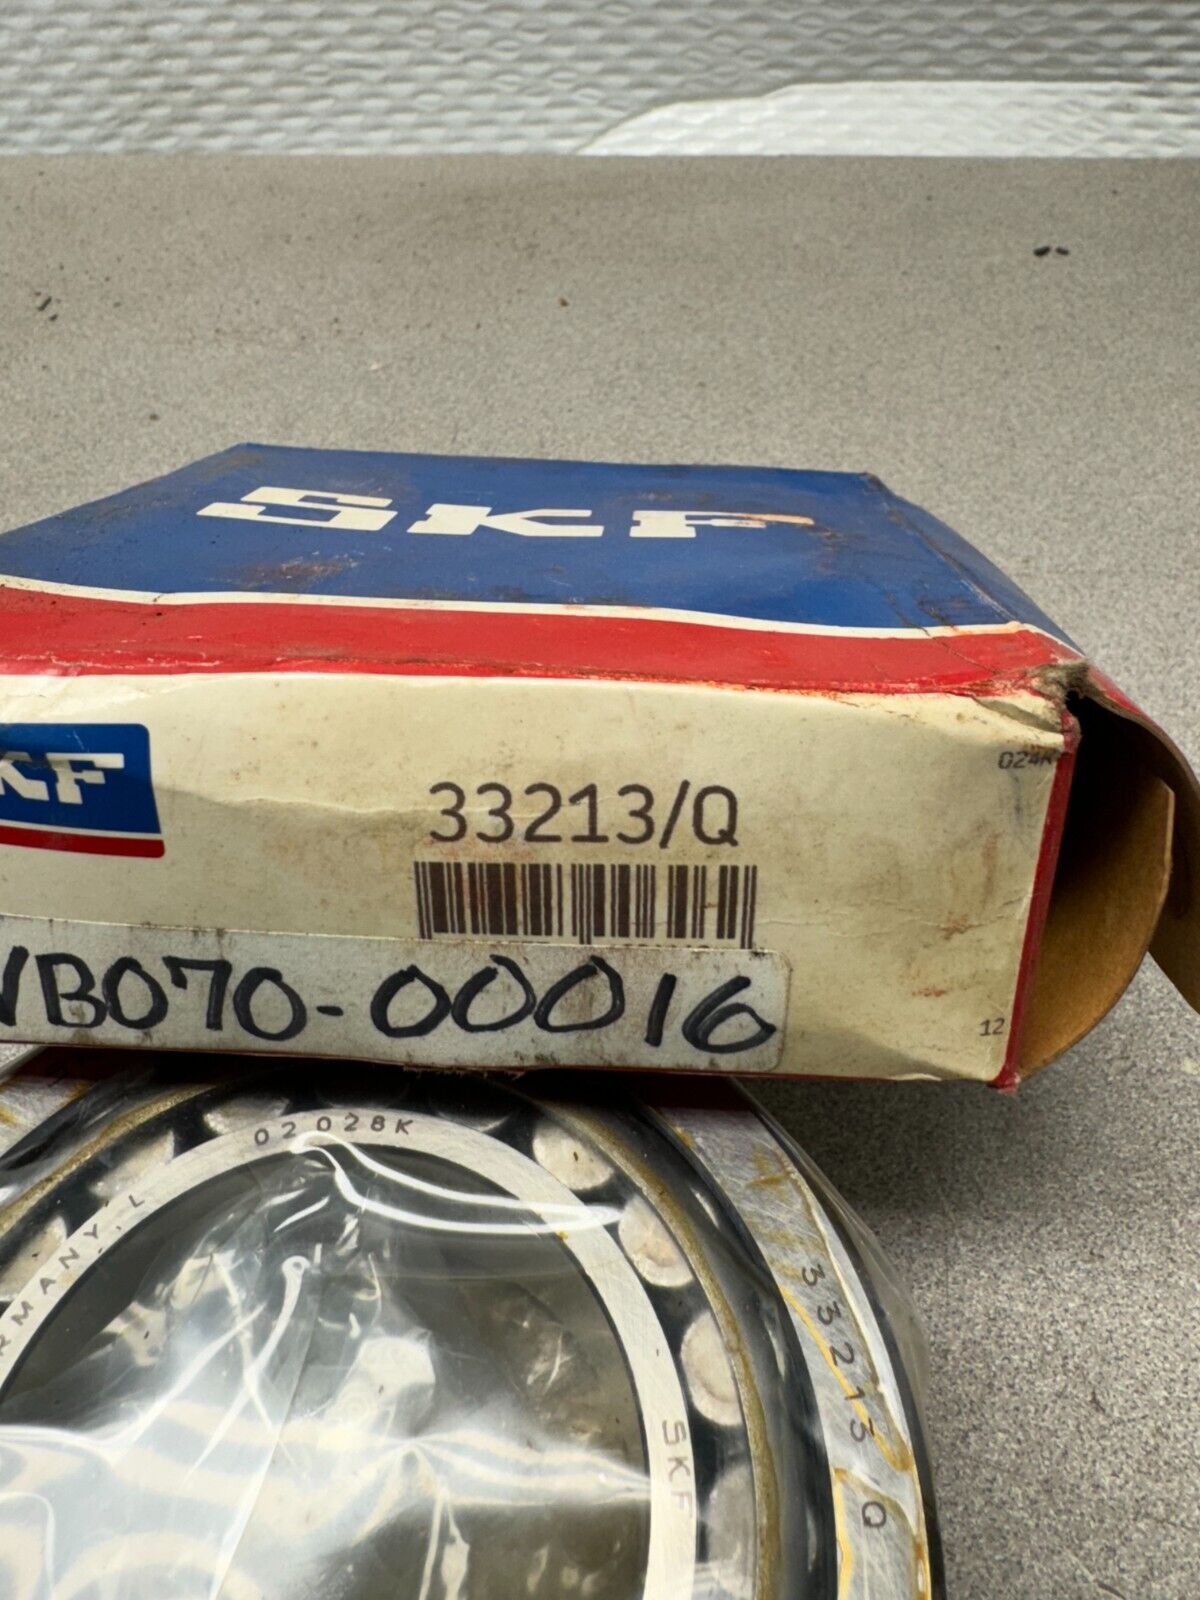 NEW IN BOX SKF TAPERED ROLLER BEARING WITH CUP 33213/Q